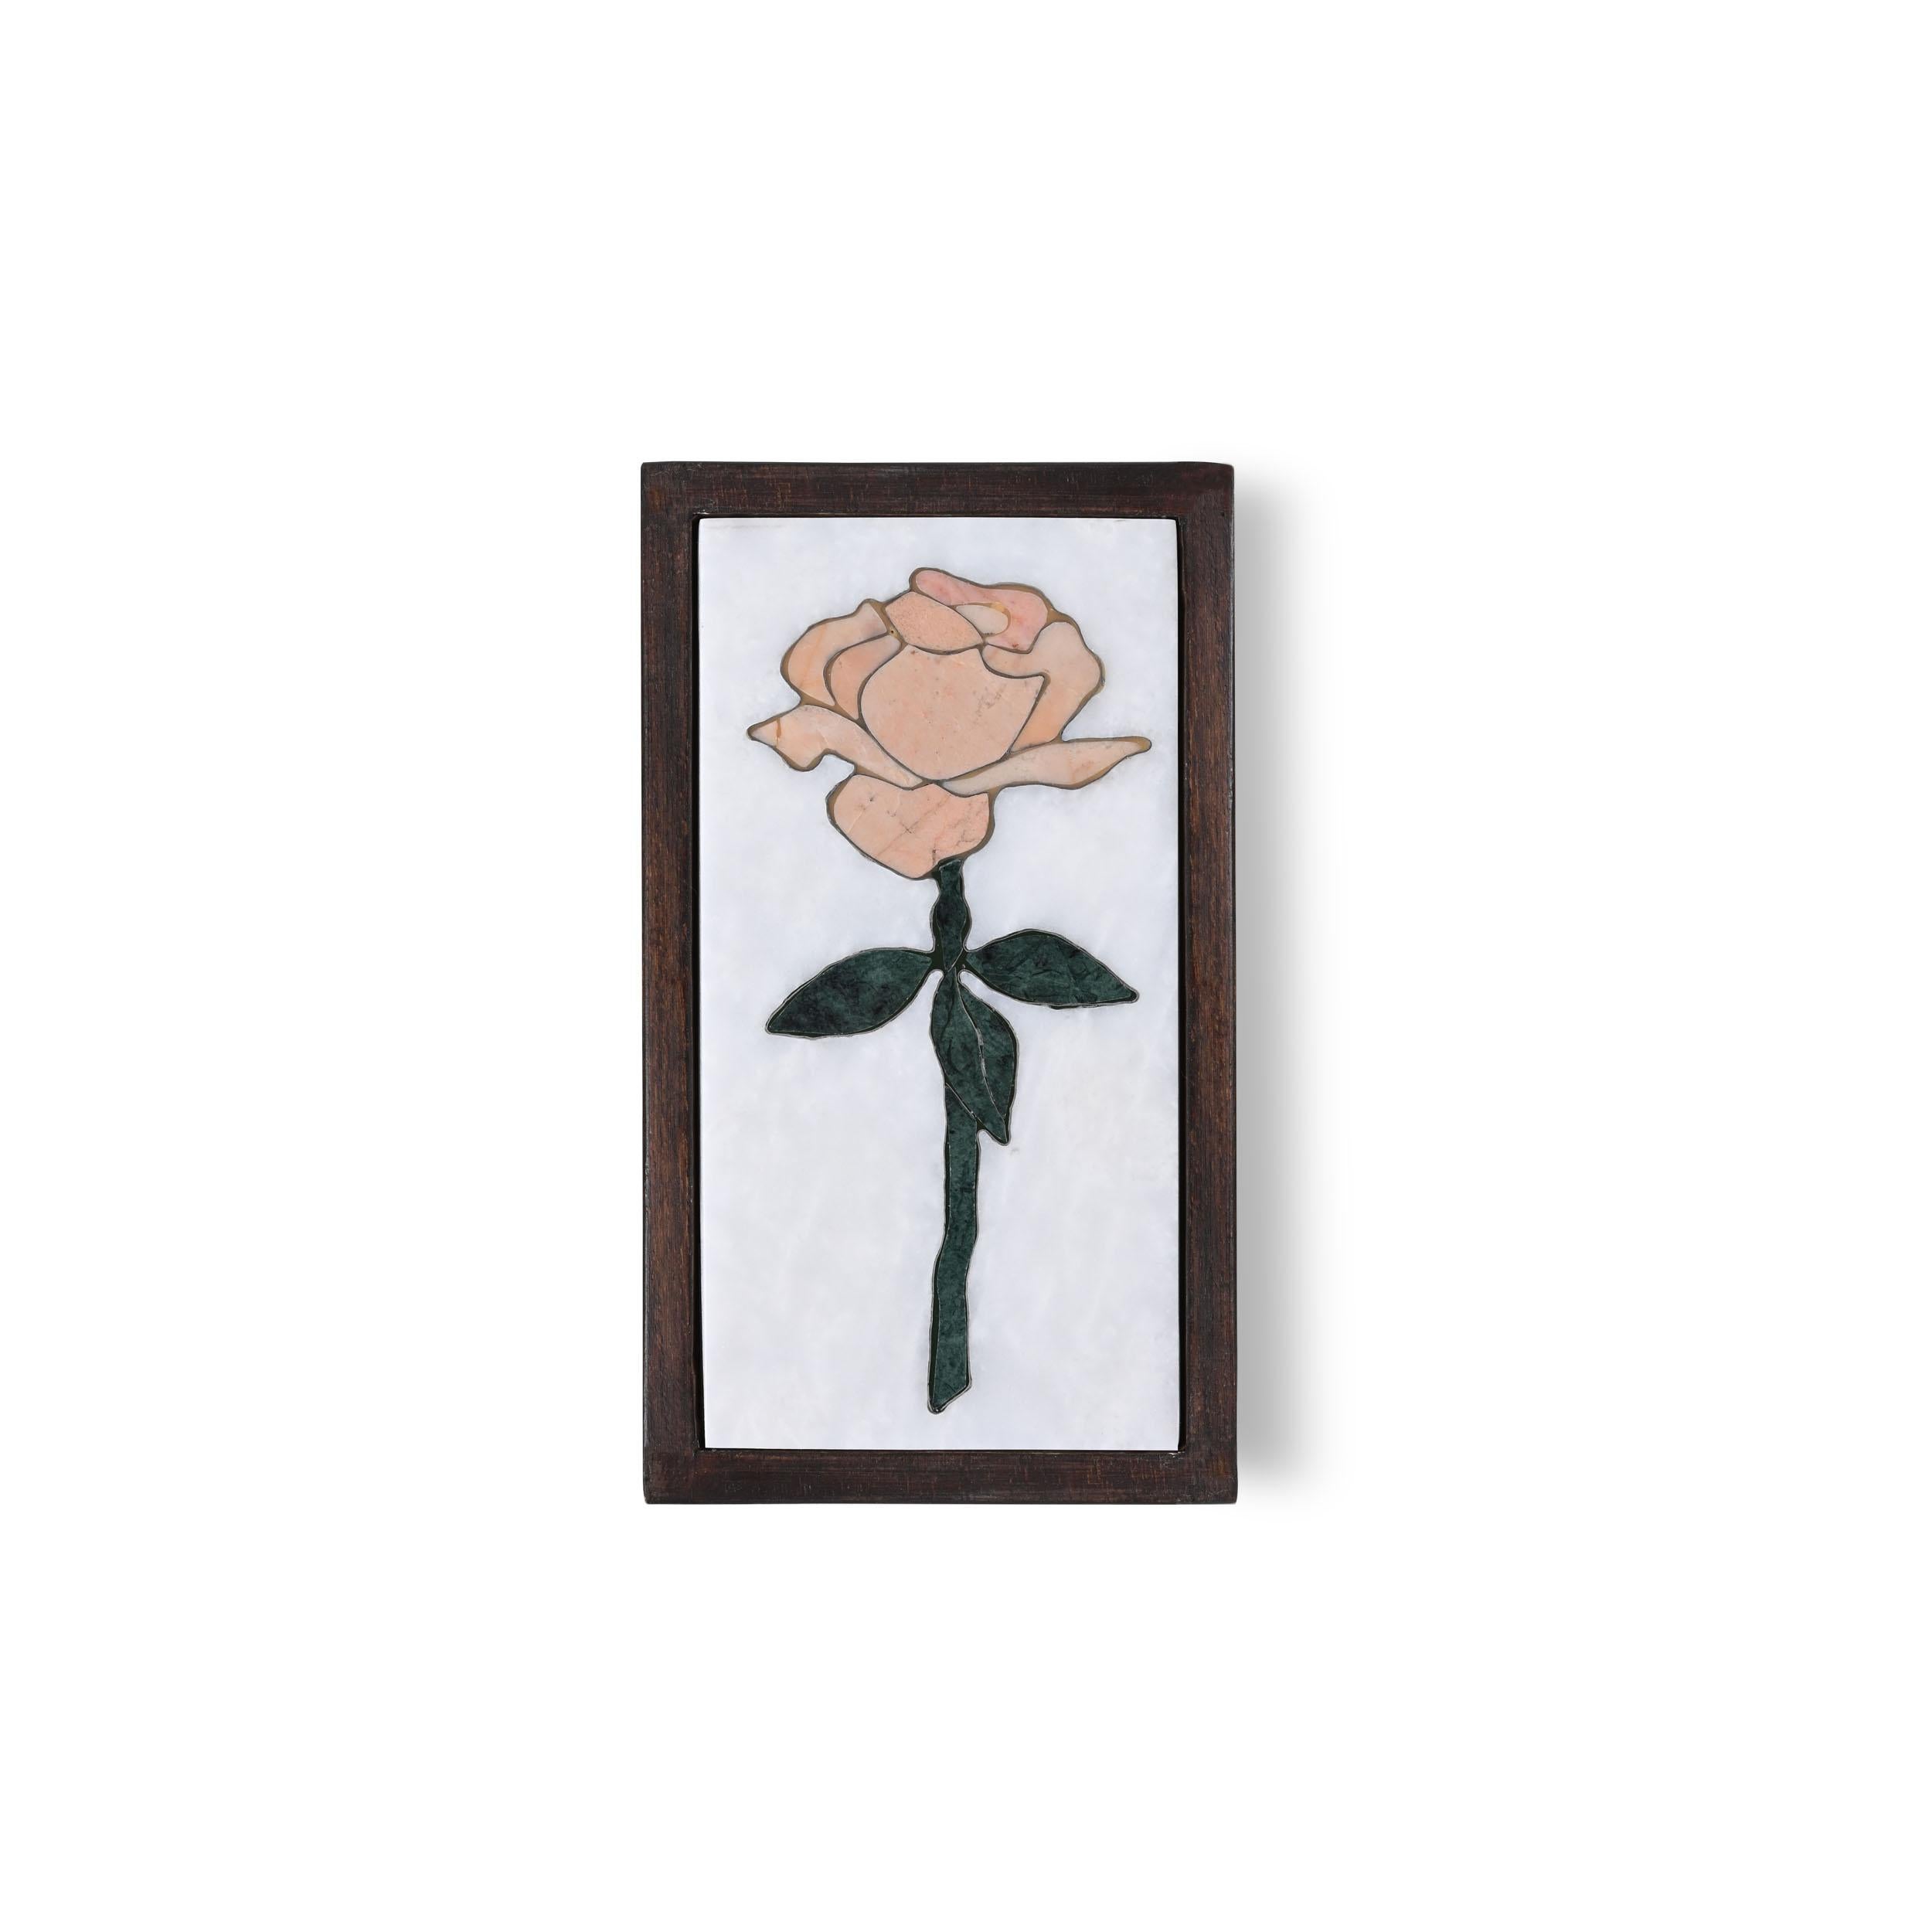 Memory of a rose box I by Studio Lel
Dimensions: D 19 x W 8.9 x H 5 cm
Materials: marble, wood

These are handmade from semiprecious stone and marble in a small artisanal workshop. Please note that variations and slight imperfections are part of